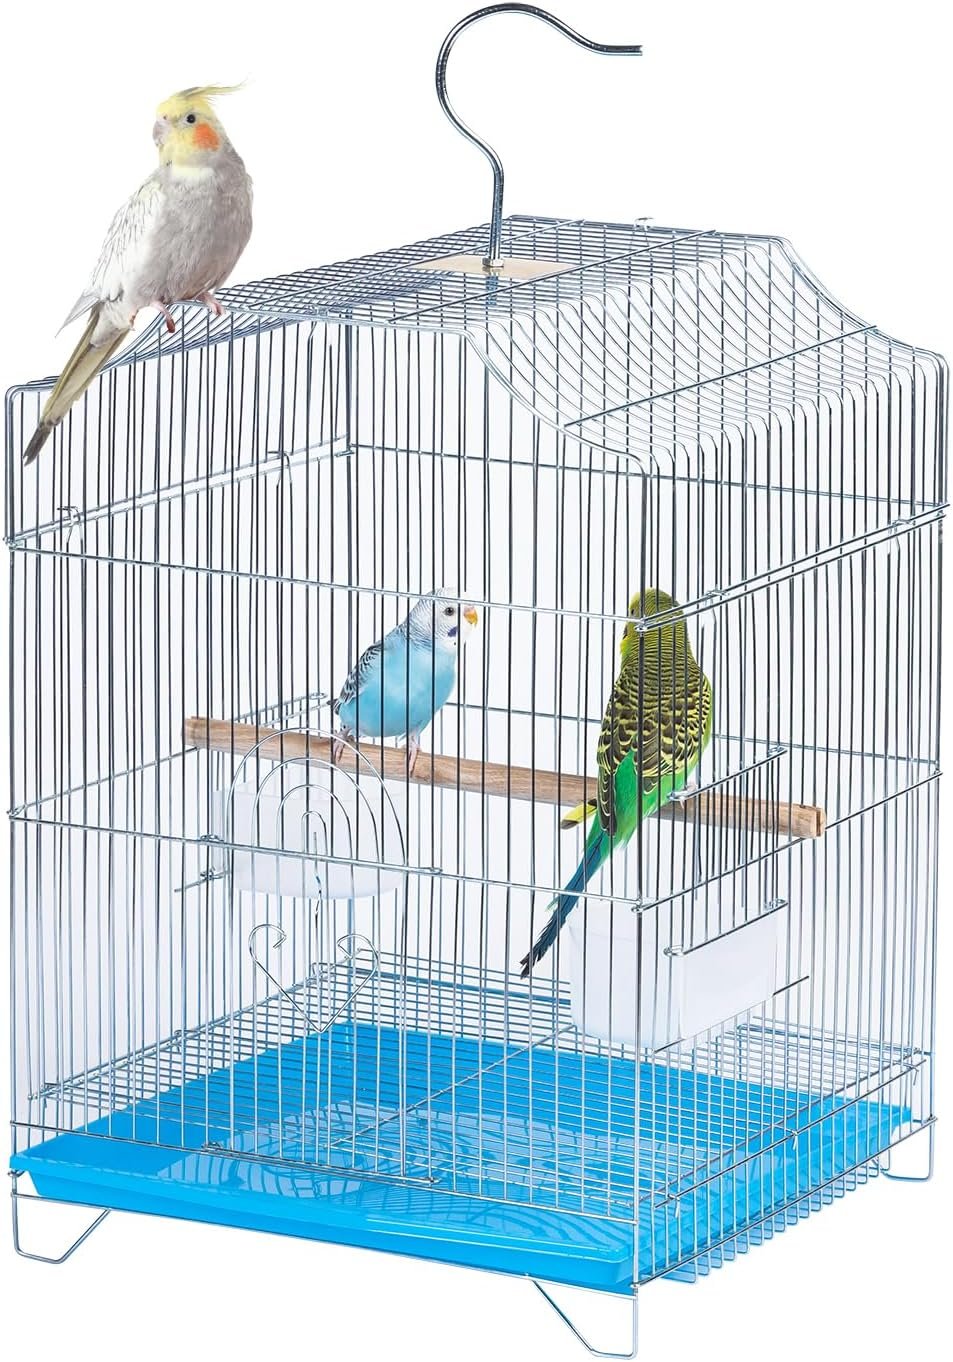 Capuca Small Bird Travel Cage-Lightweight Small Birds Starter Kit with Birdcages and Accessories Great for Parakeets Lovebirds Parrotlets Finches Canaries Removable Plastic Tray Include